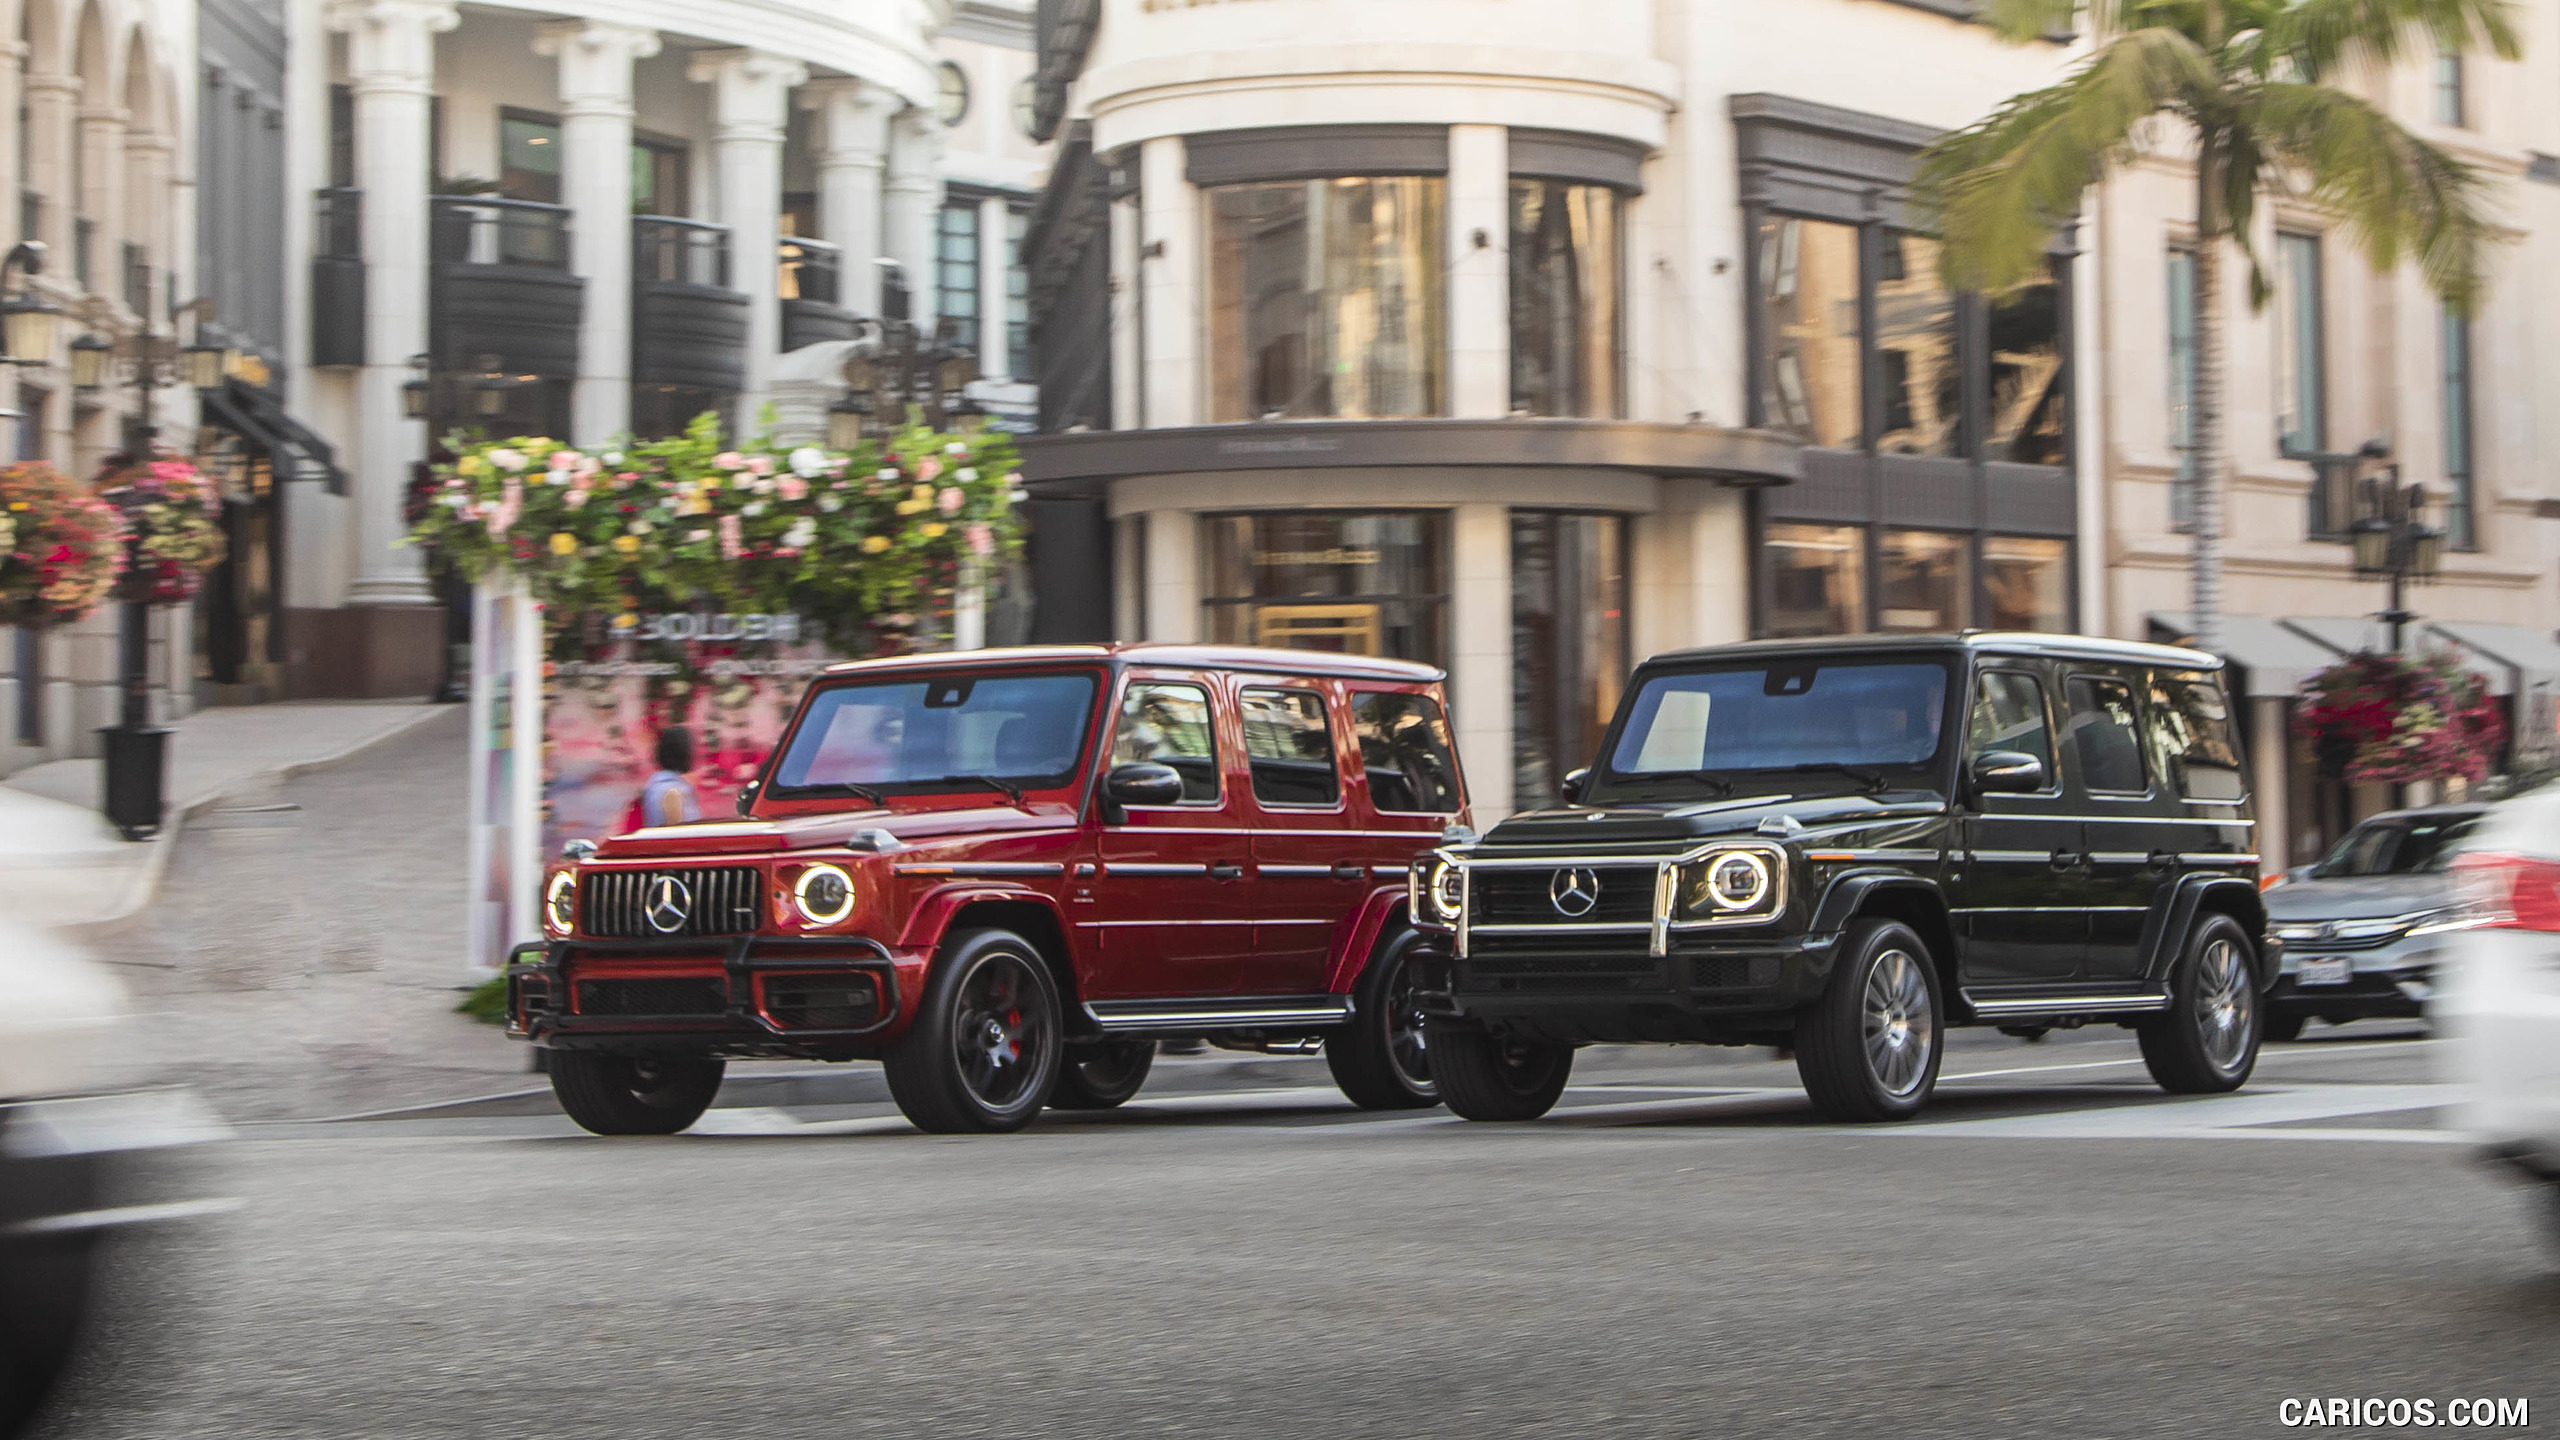 2019 Mercedes-AMG G63 (U.S.-Spec) and 2019 G550, #311 of 452